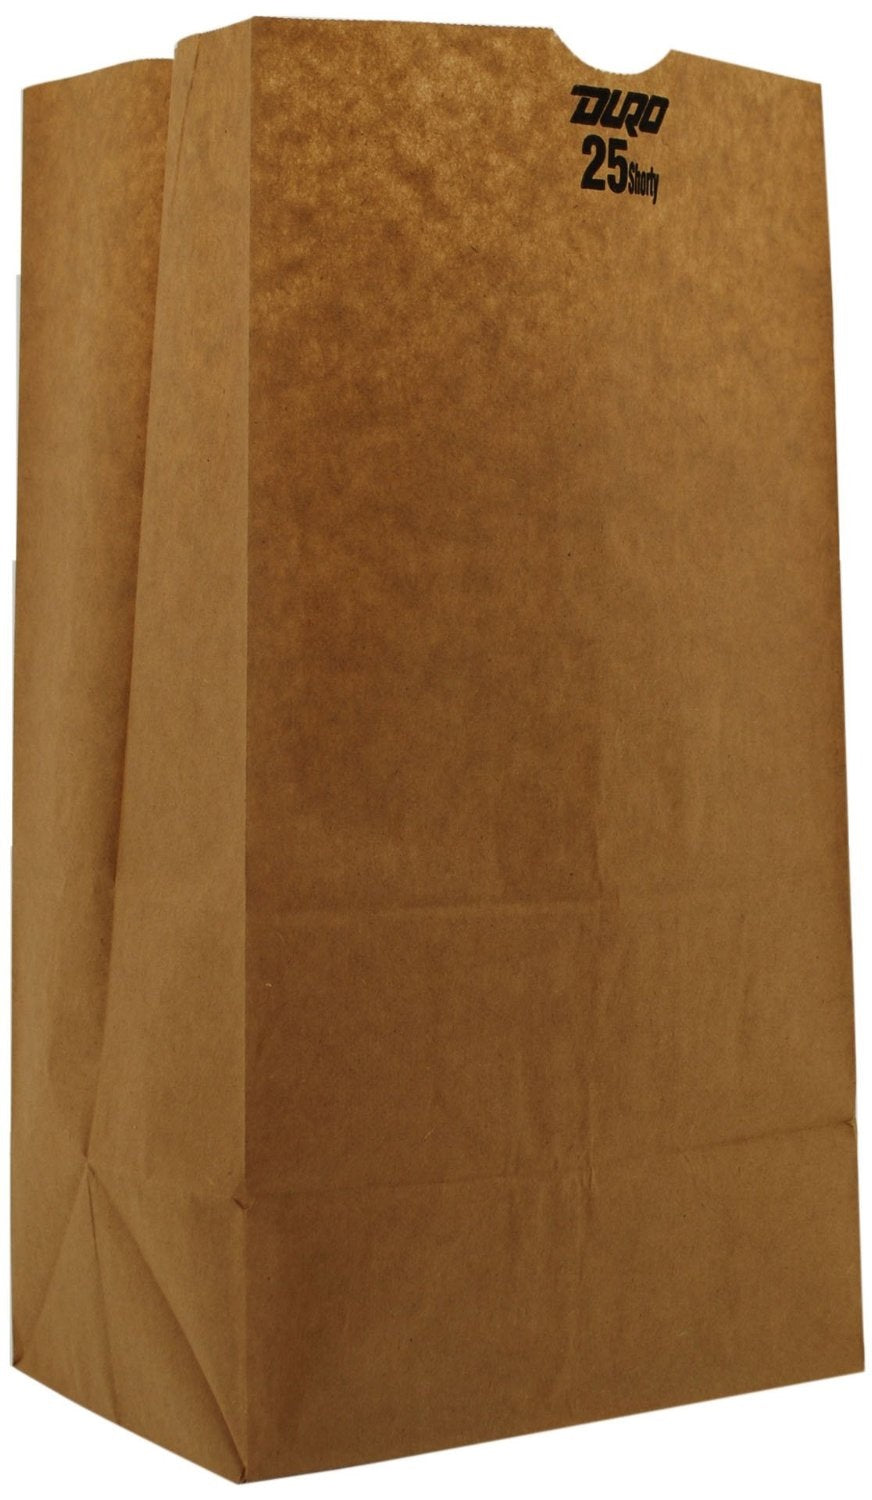 buy kitchen grocery bags at cheap rate in bulk. wholesale & retail storage & organizers supplies store.